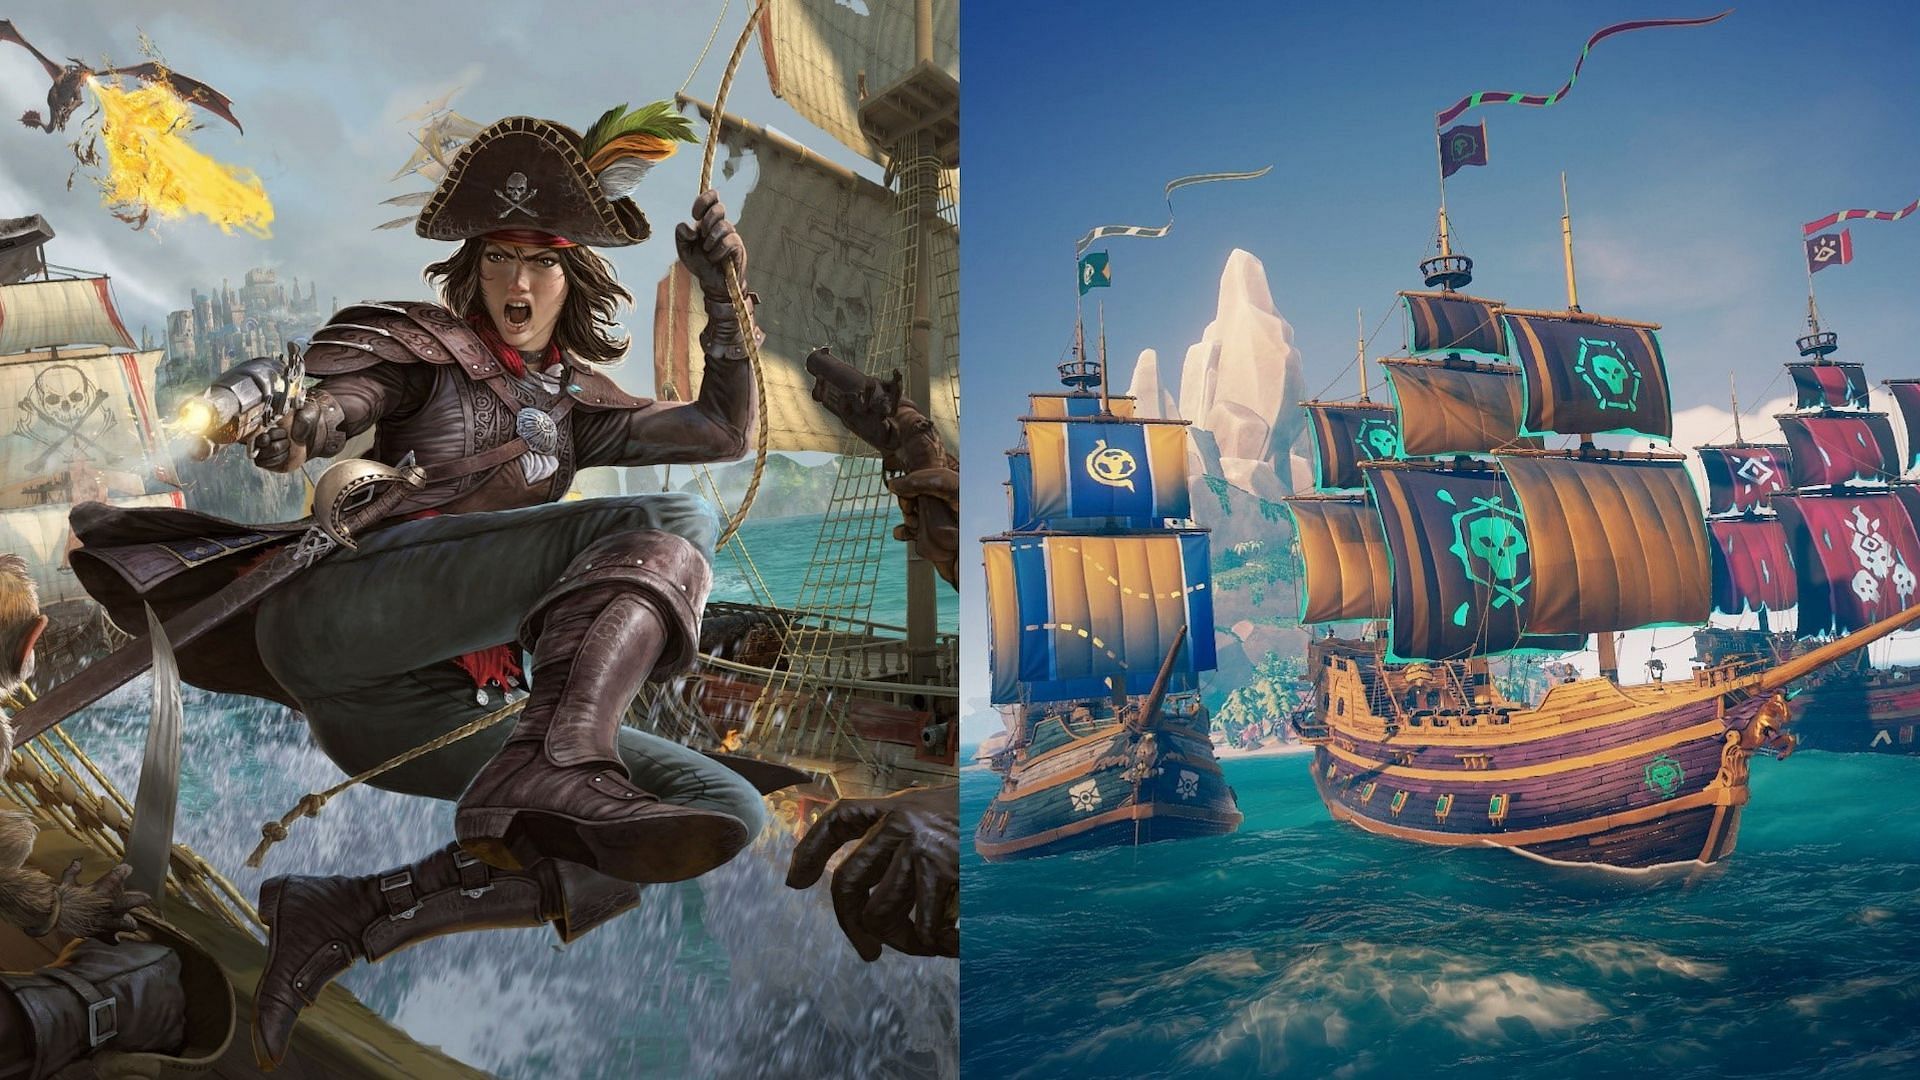 A character in Atlas on the left and ships from Sea of Thieves on the right.